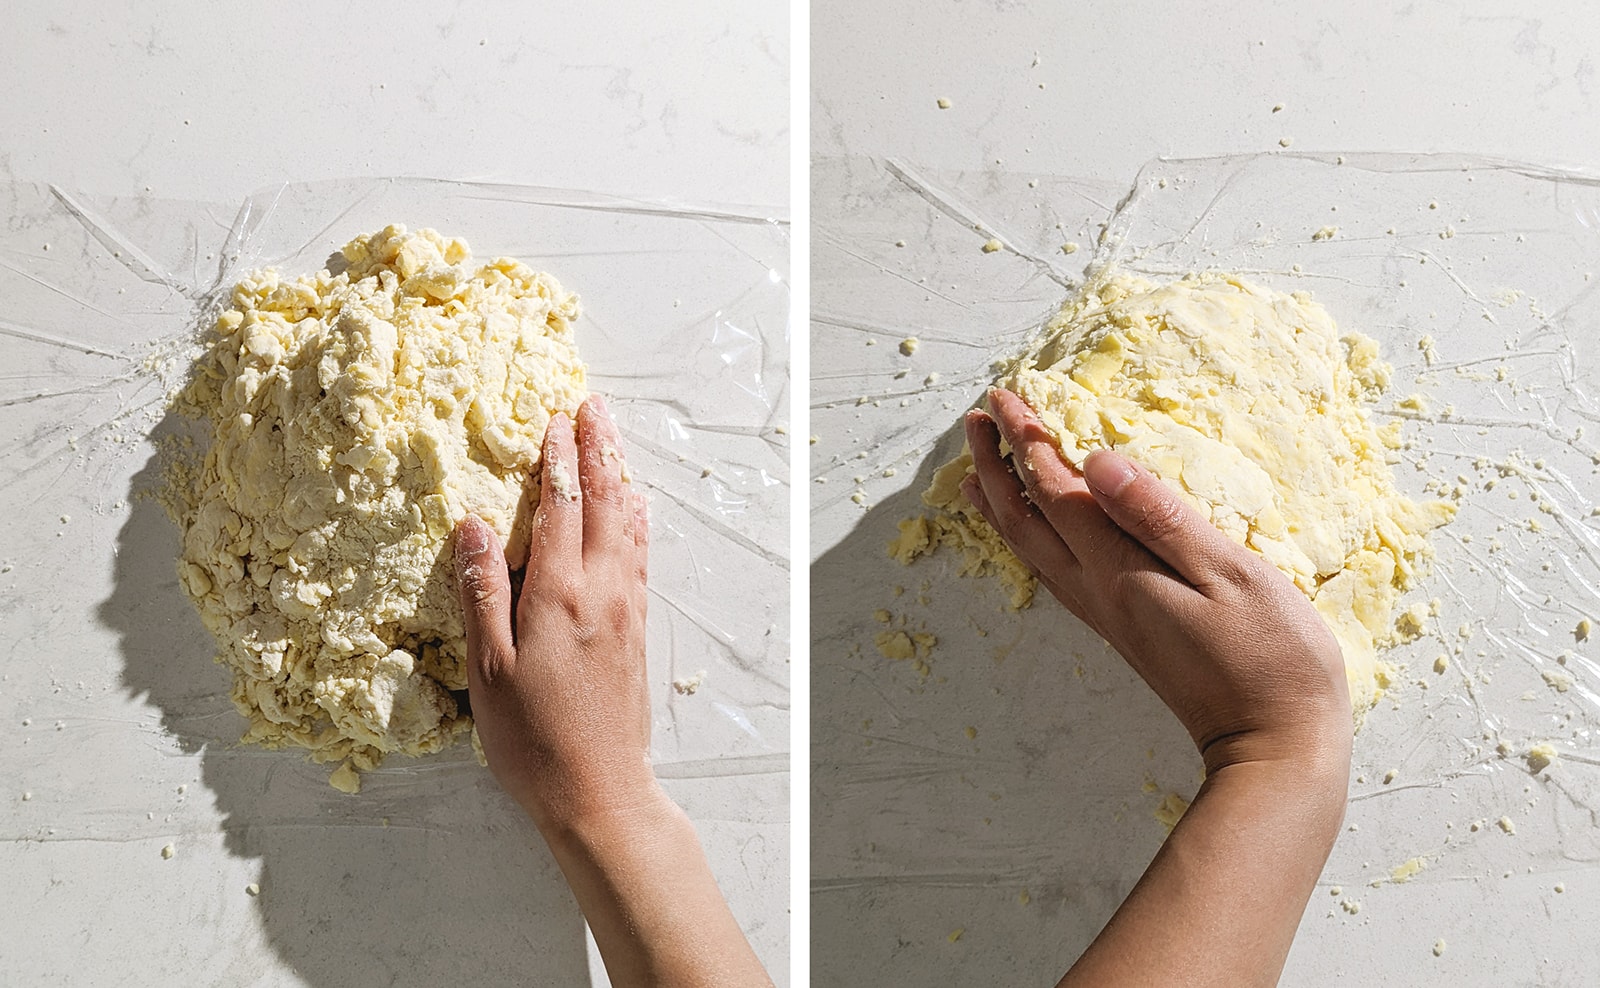 Left to right: hand pressing a pile of pie dough together, hand folding pie dough onto itself.